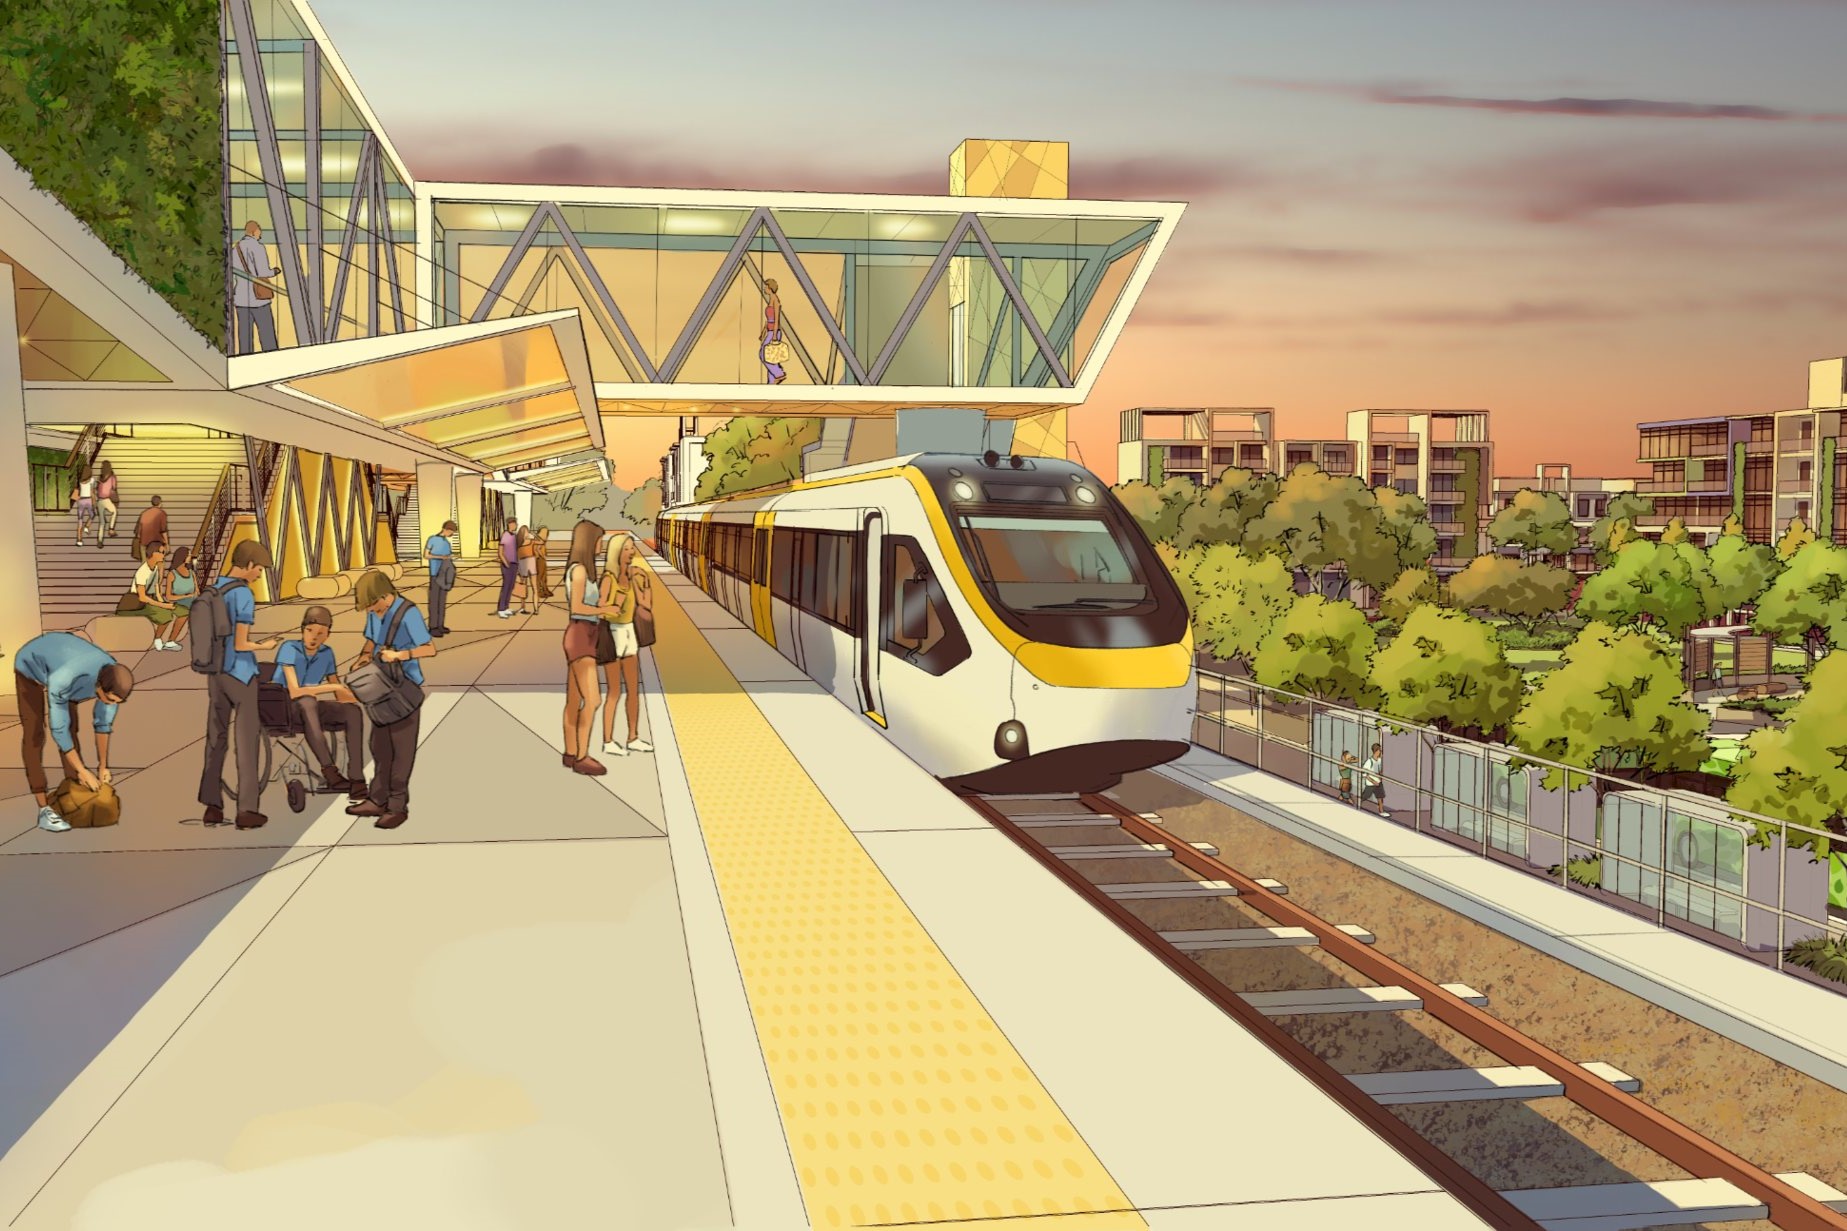 Qld government slammed for direct rail plan but Opposition unable to offer alternative option